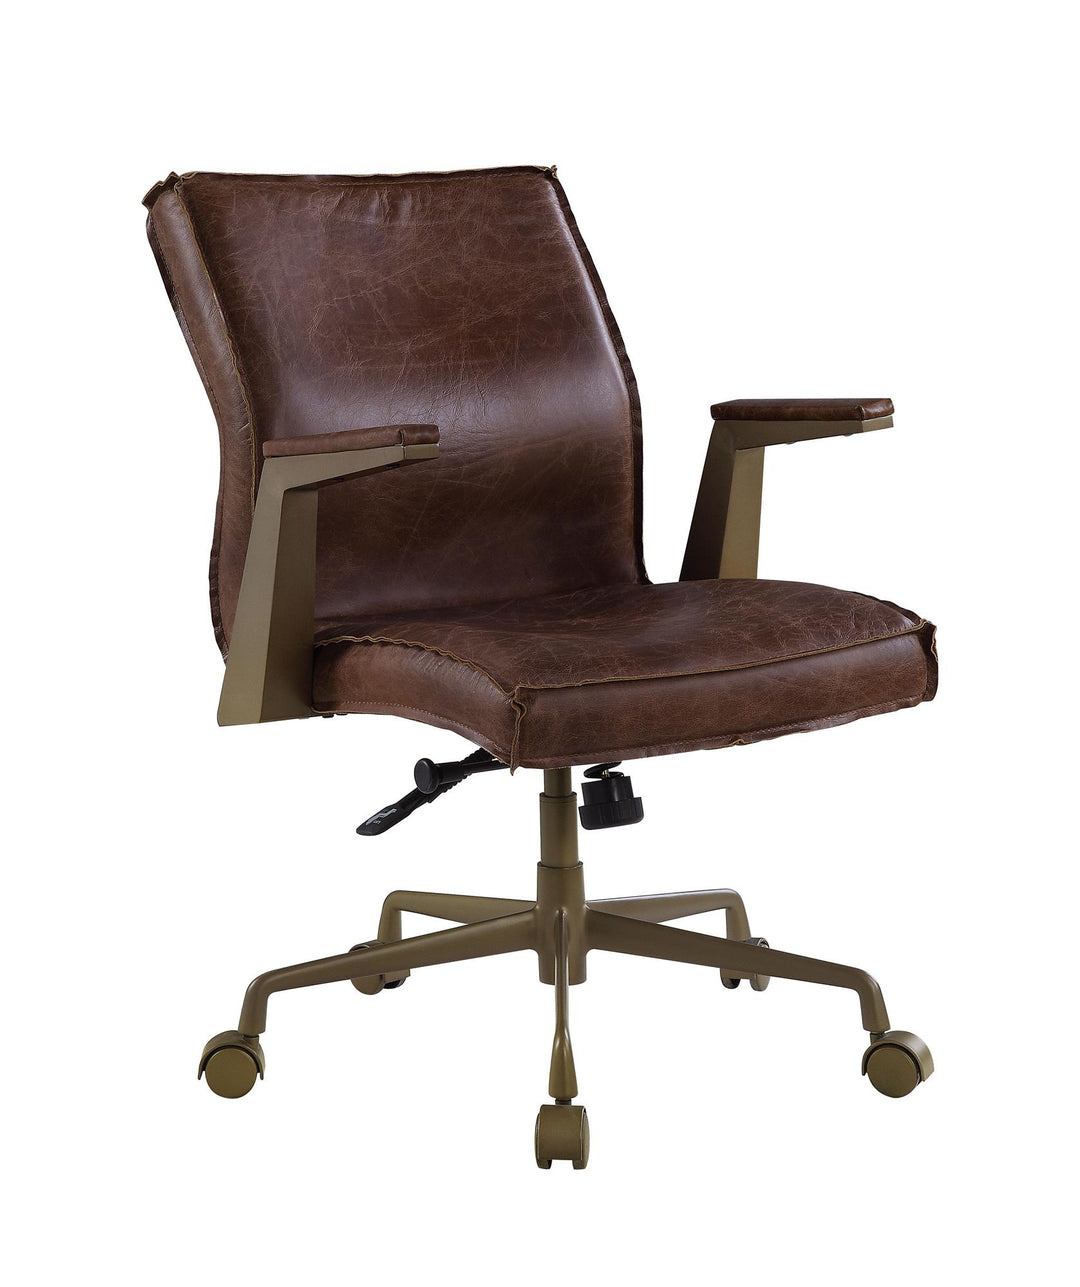 3" Lift  executive office chair - Espresso